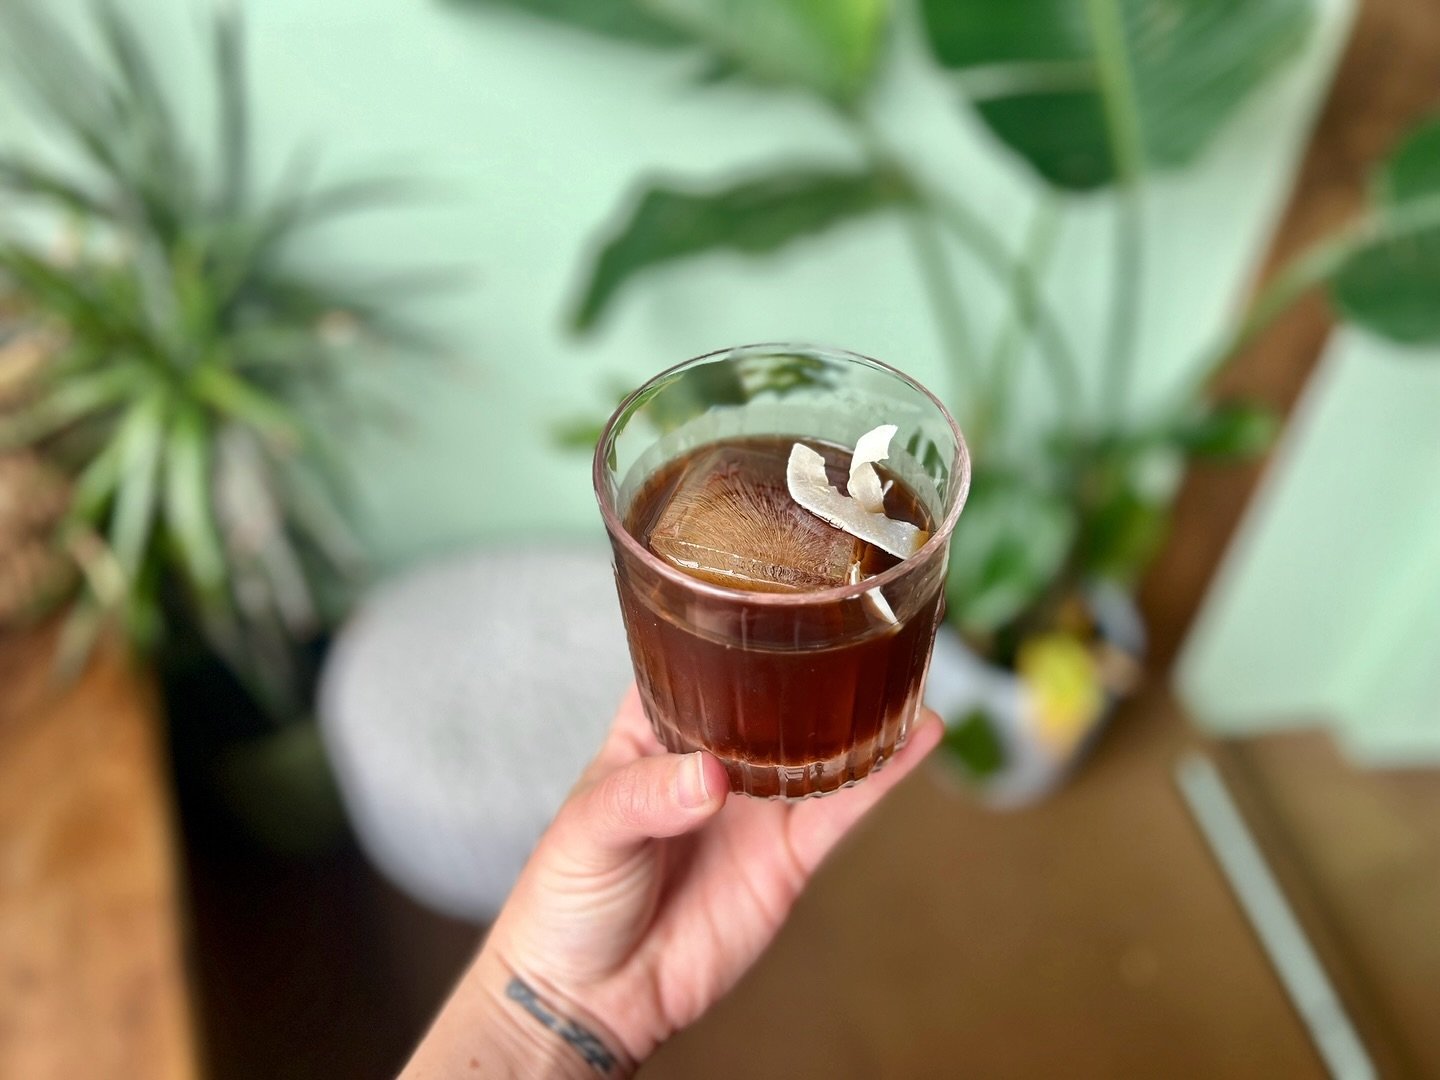 Patiently waiting for warm weather with summer inspired cocktails ☀️ Sipping on a Coconut Cold Brew Shaken Bourbon 🥥 ☕️ @greatjonesdistillingco Bourbon, house brewed cold brew coffee, and a touch of coconut infused syrup 👌 

Open Thursdays from 3-9